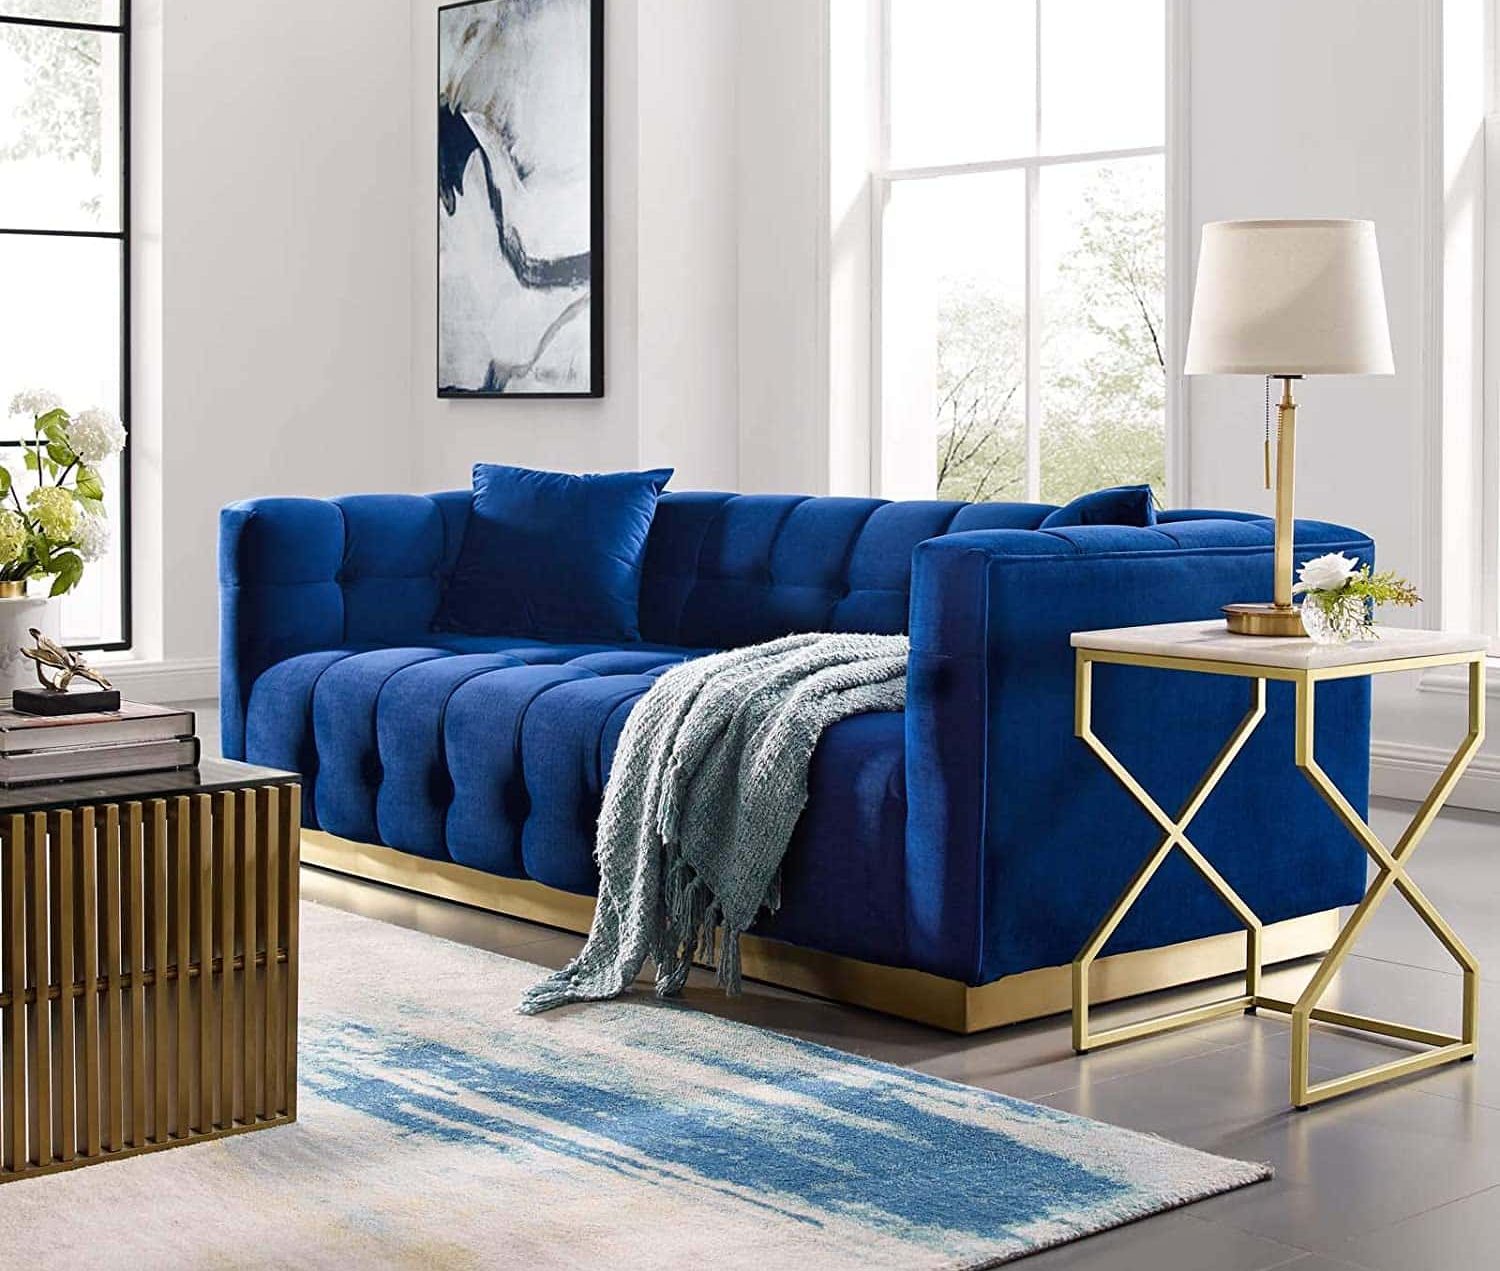 What Color Rug Goes With A Blue Couch, What Color Rug Goes With Navy Blue Sofa